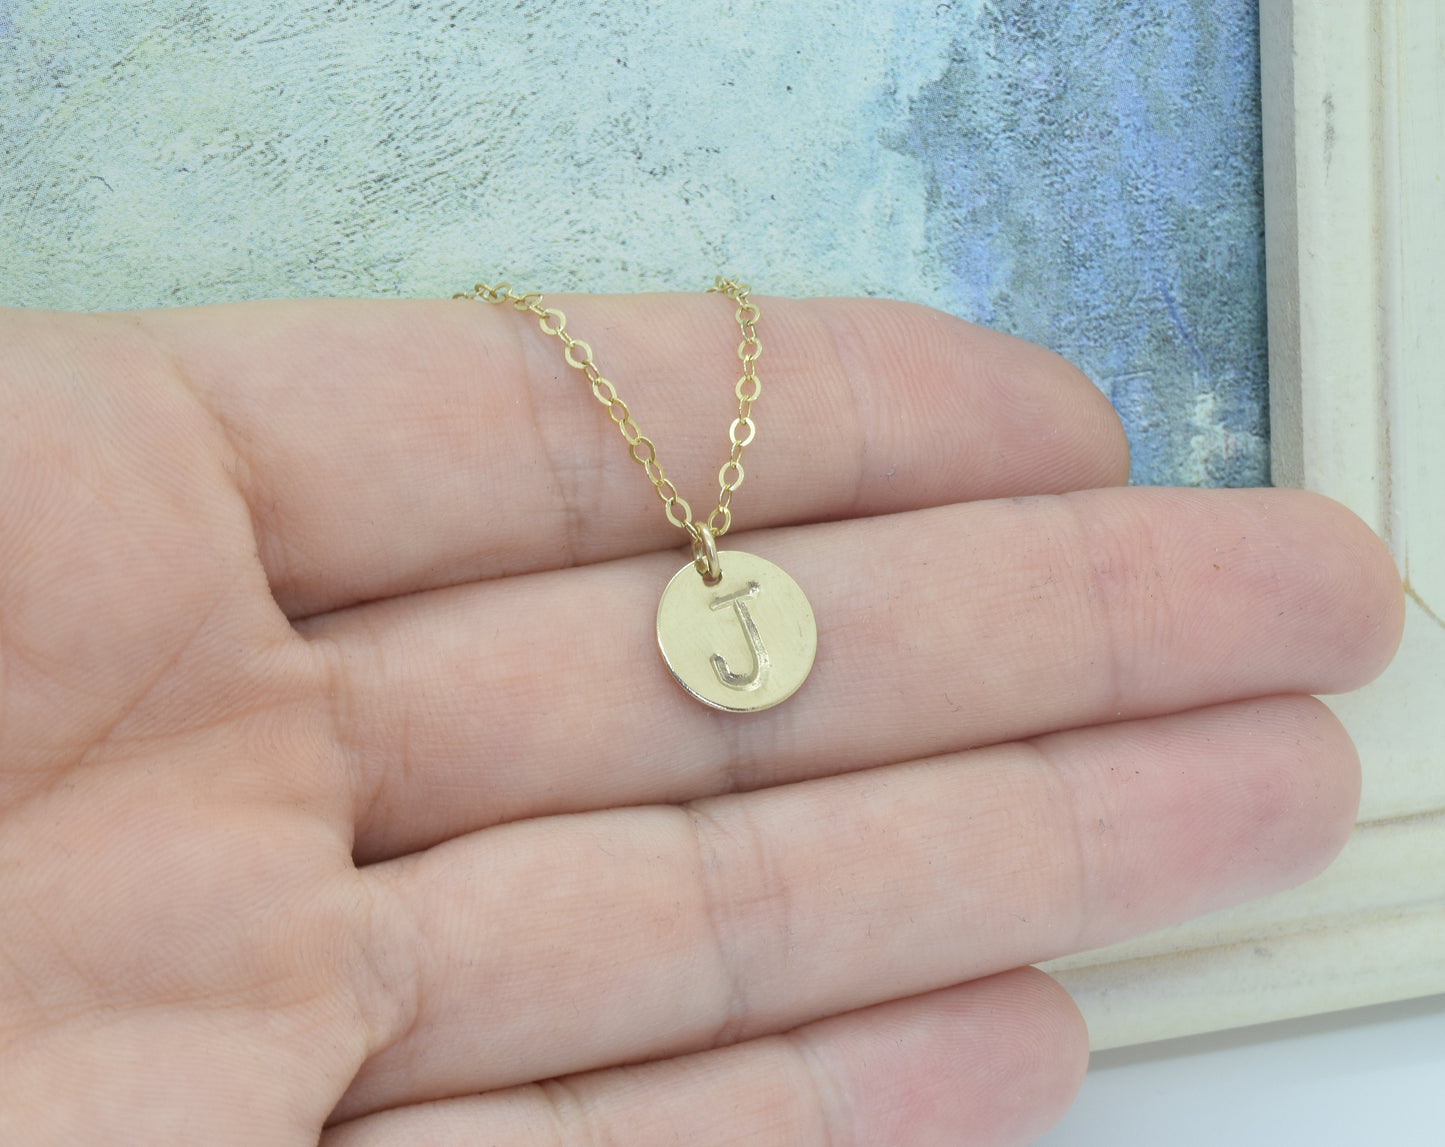 Gold Large Initial Necklace with Birthstone Crystal